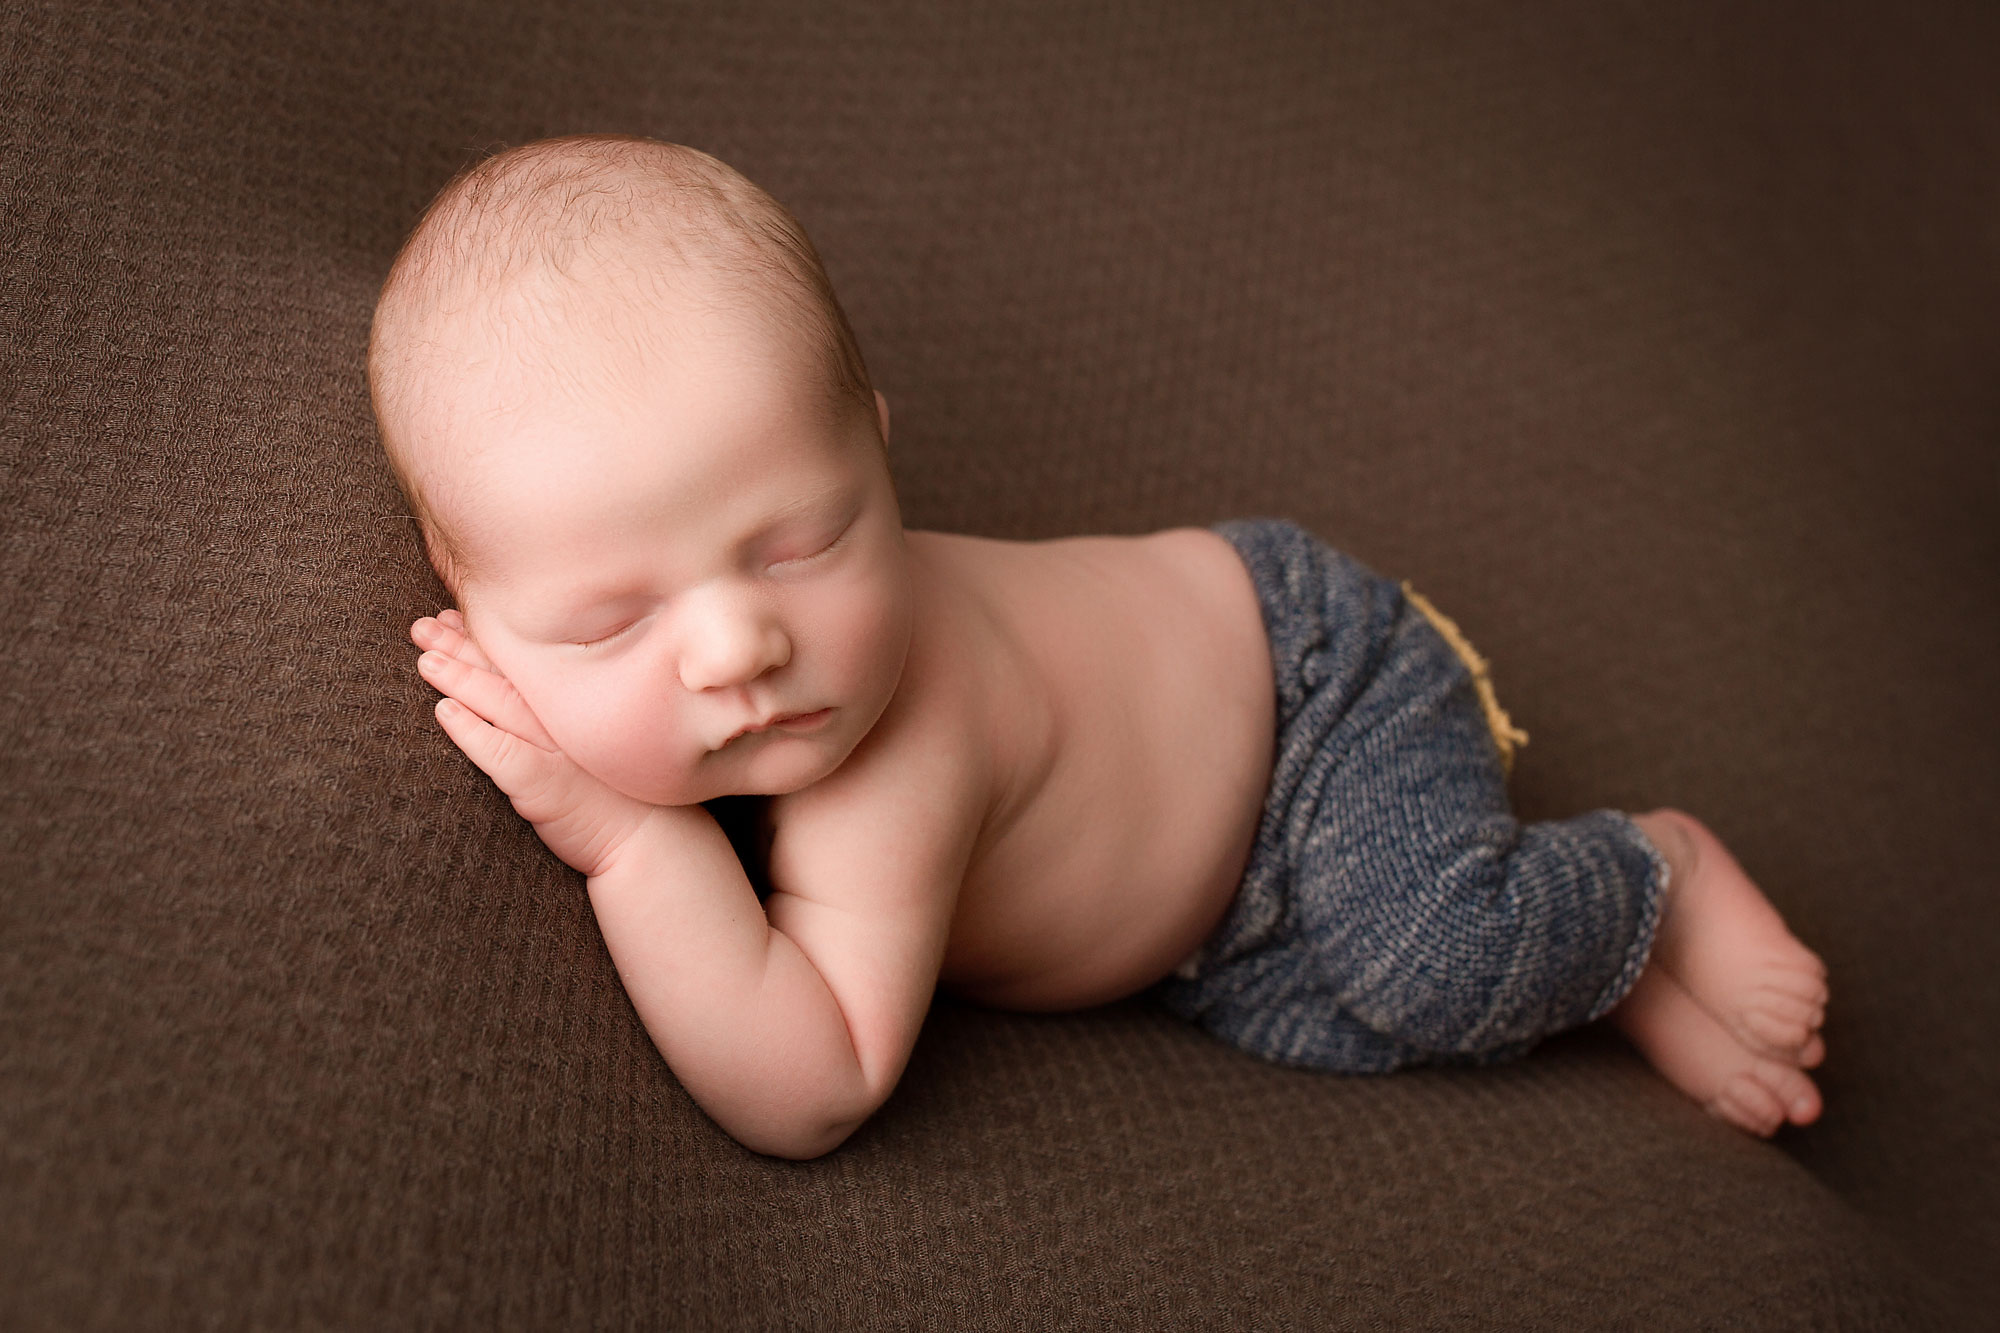 newborn photography near me new jersey, sleeping baby boy in blue pants against brown background